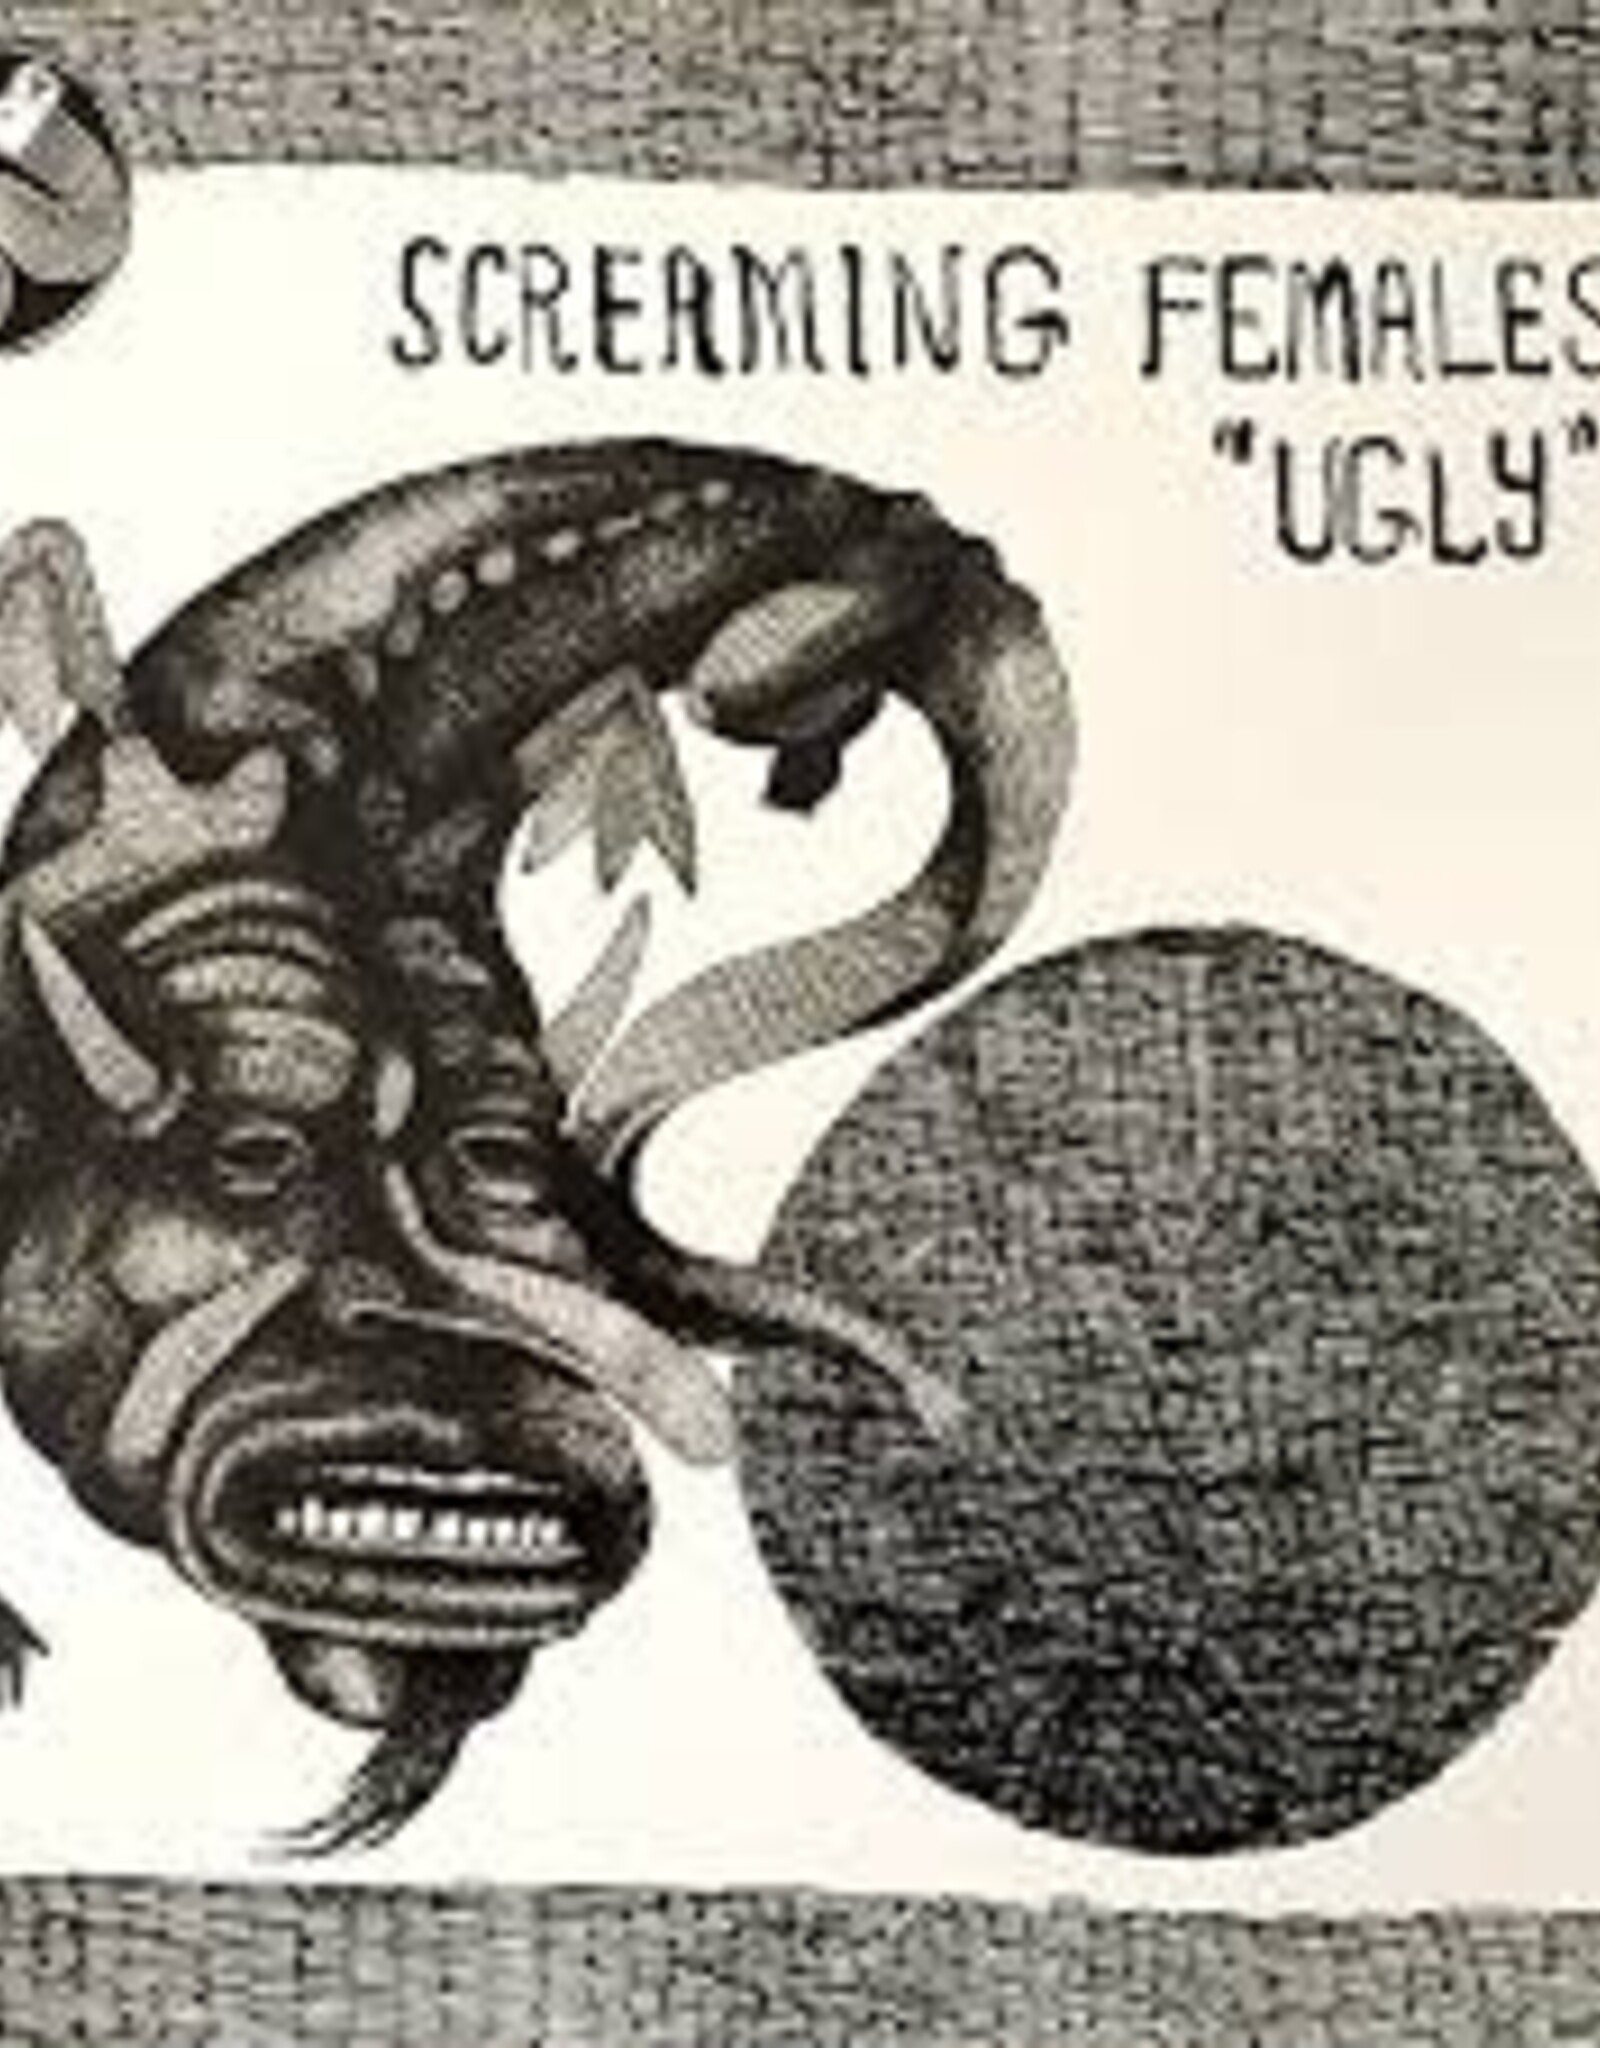 Screaming Females - Ugly (Limited Edition Clear w/ Black Splatter Vinyl)